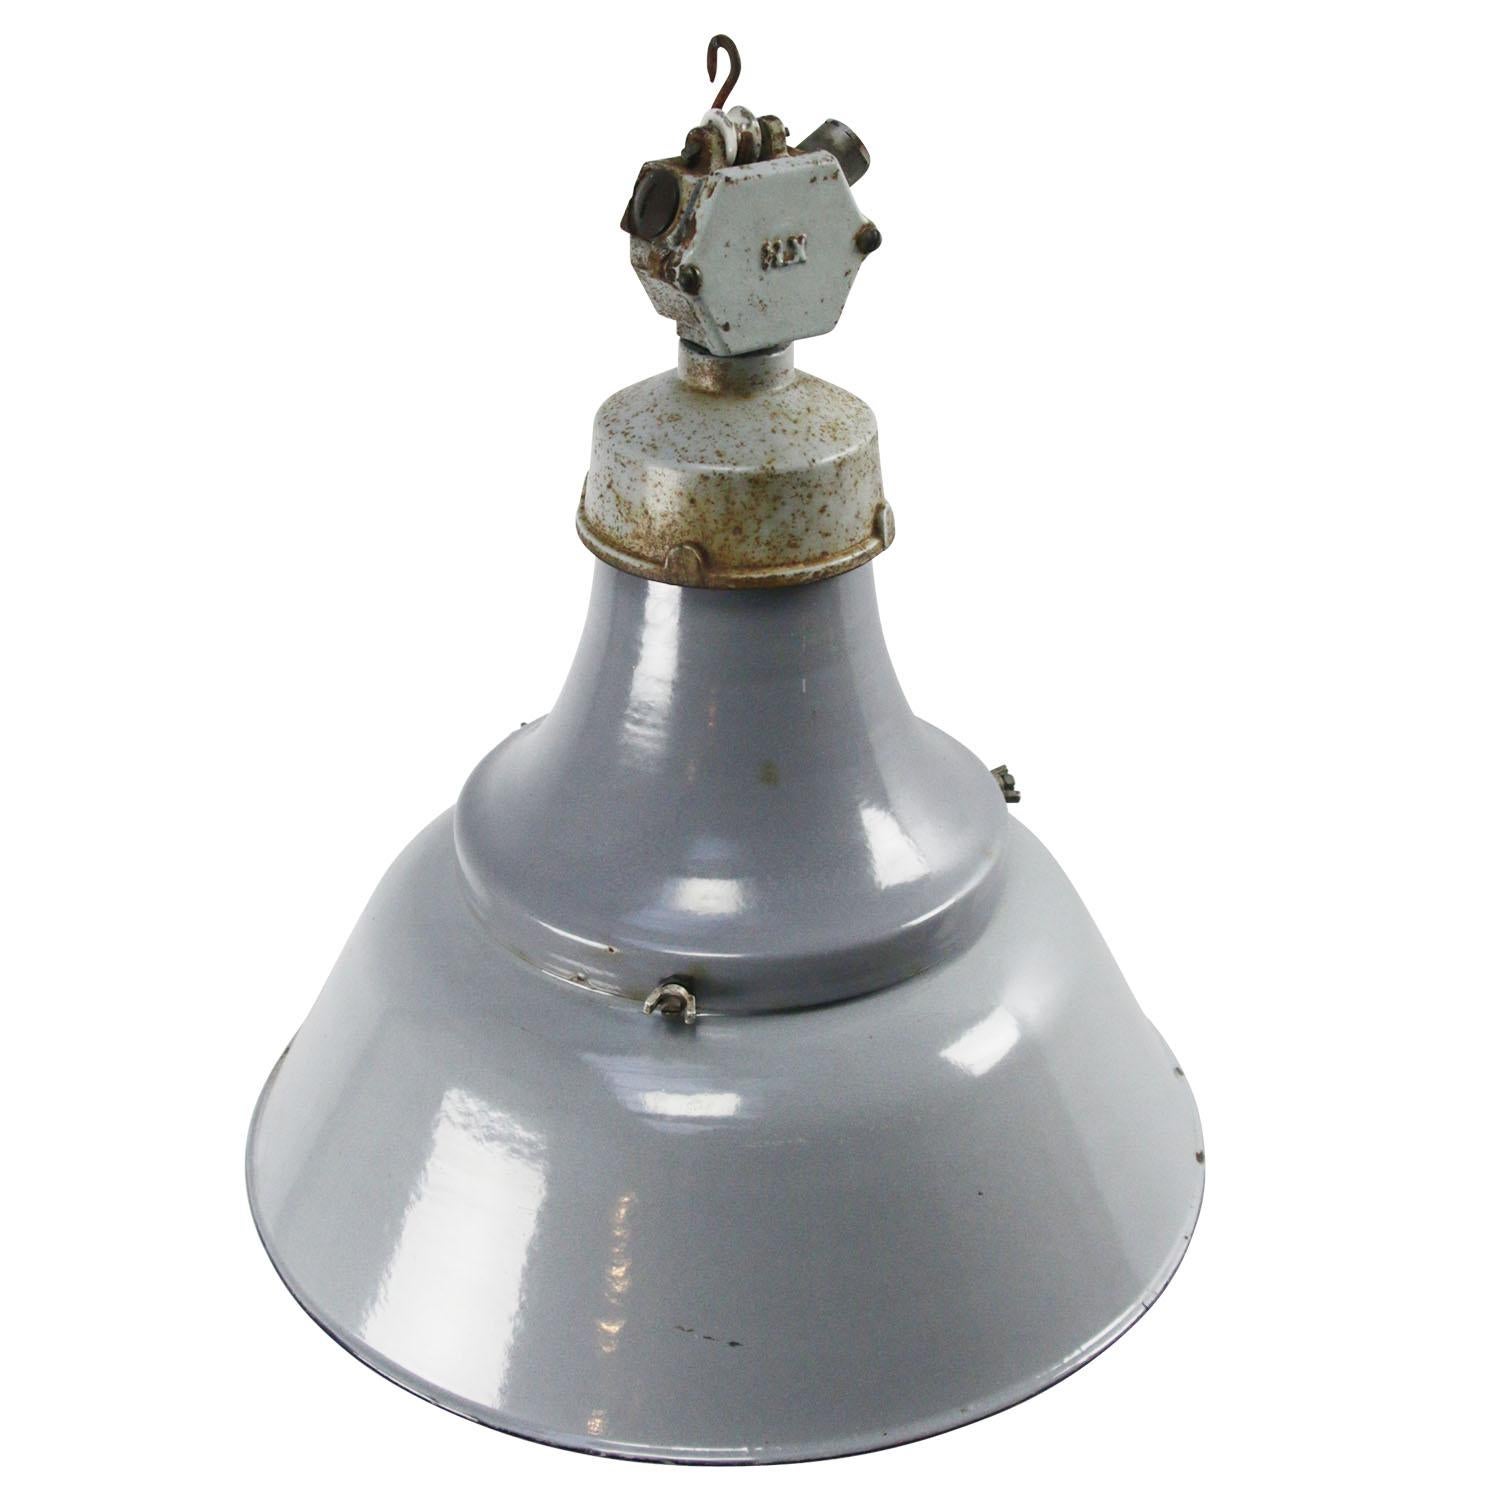 Enamel industrial pendant
blue grey enamel shade, cast iron top, white inside.

E27/E26

Weight: 3.50 kg / 7.7 lb

Priced per individual item. All lamps have been made suitable by international standards for incandescent light bulbs,